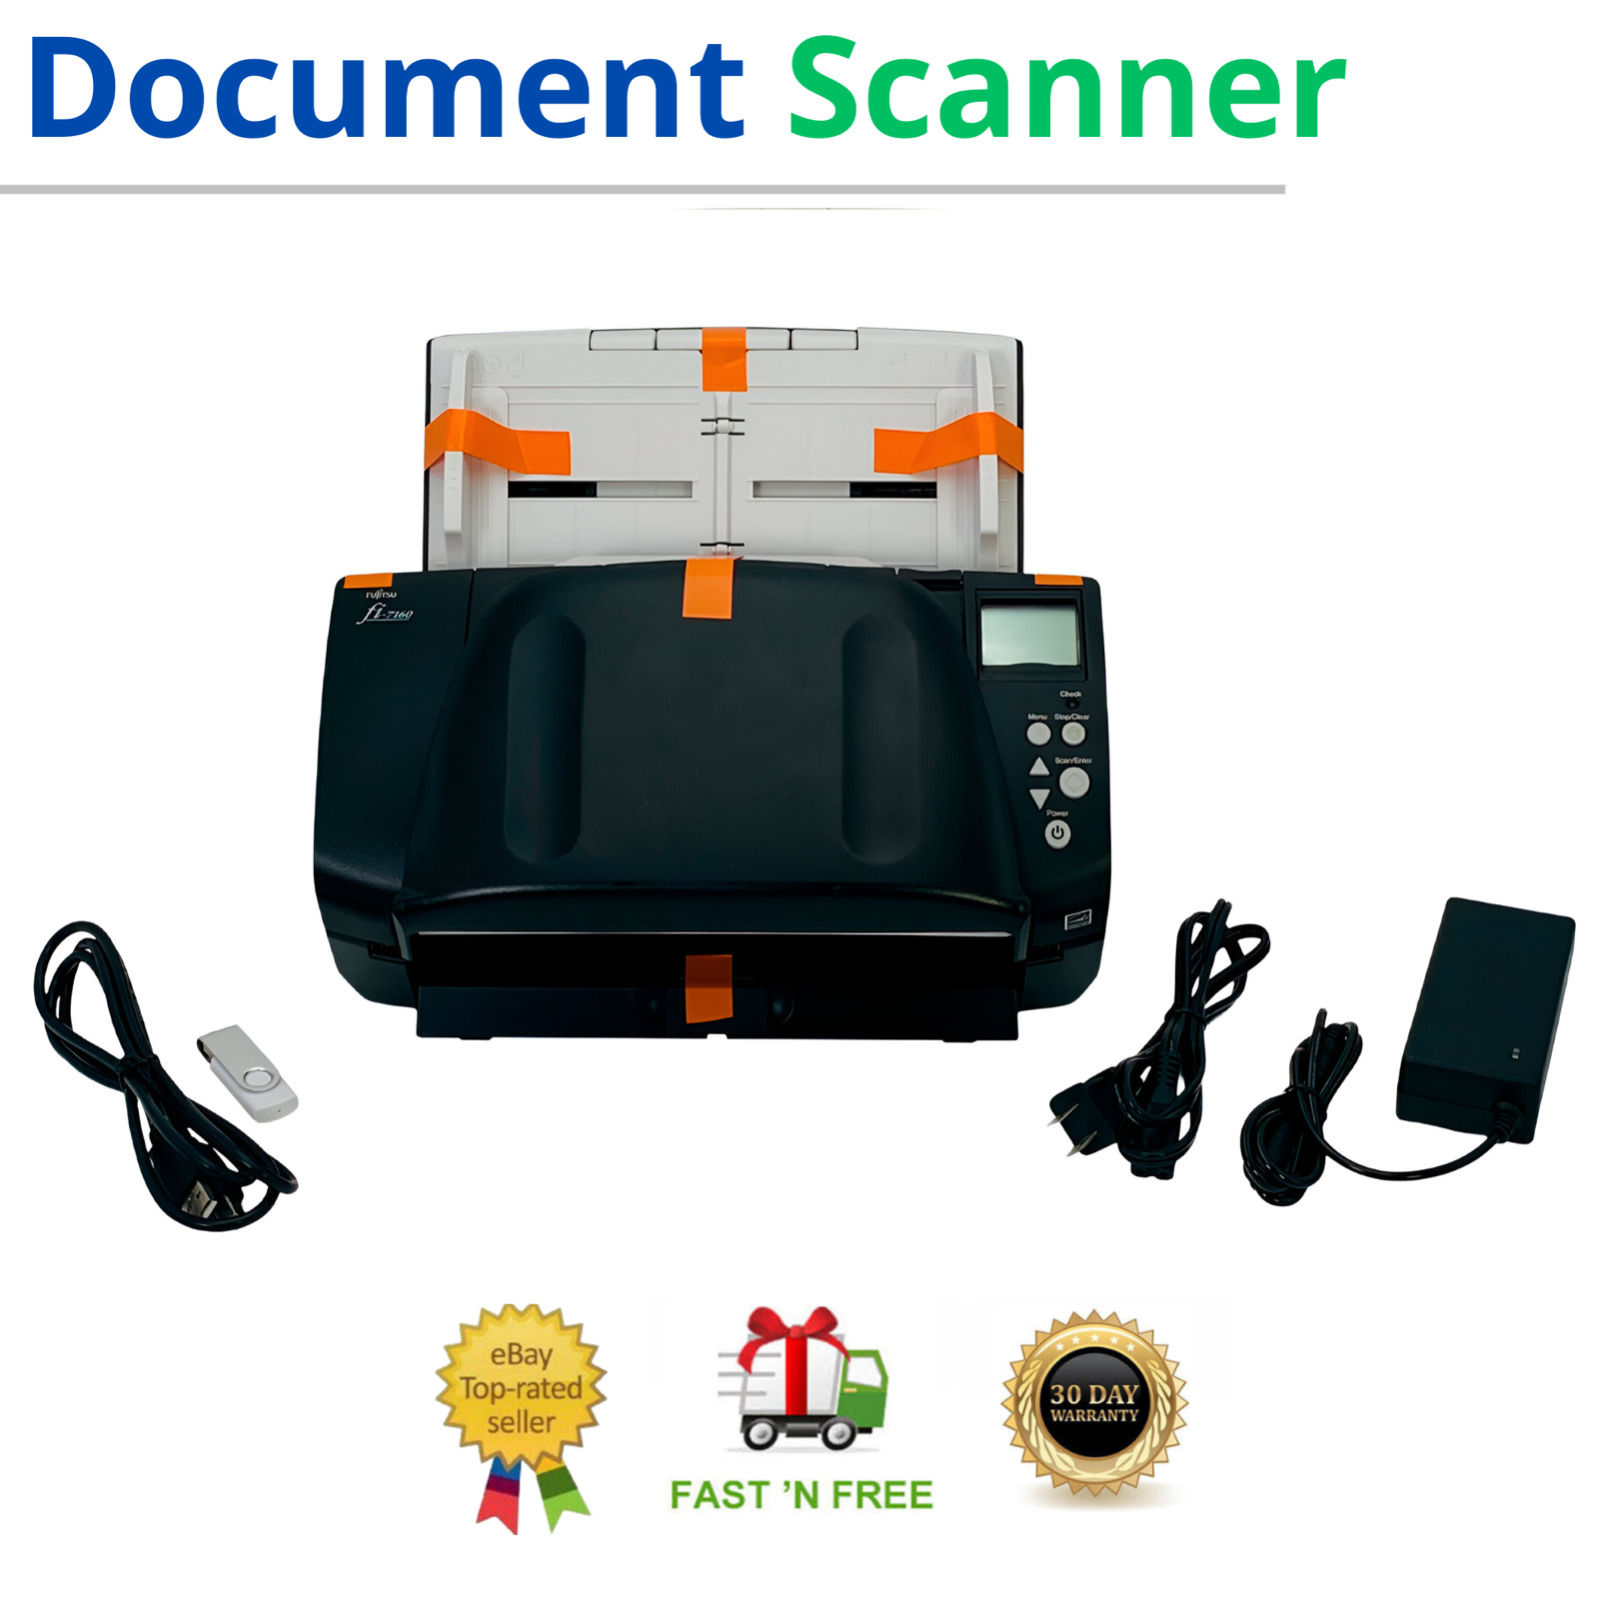 Professional Sheetfed High Speed Document Scanner for Work w/Adapter+USB+Drivers